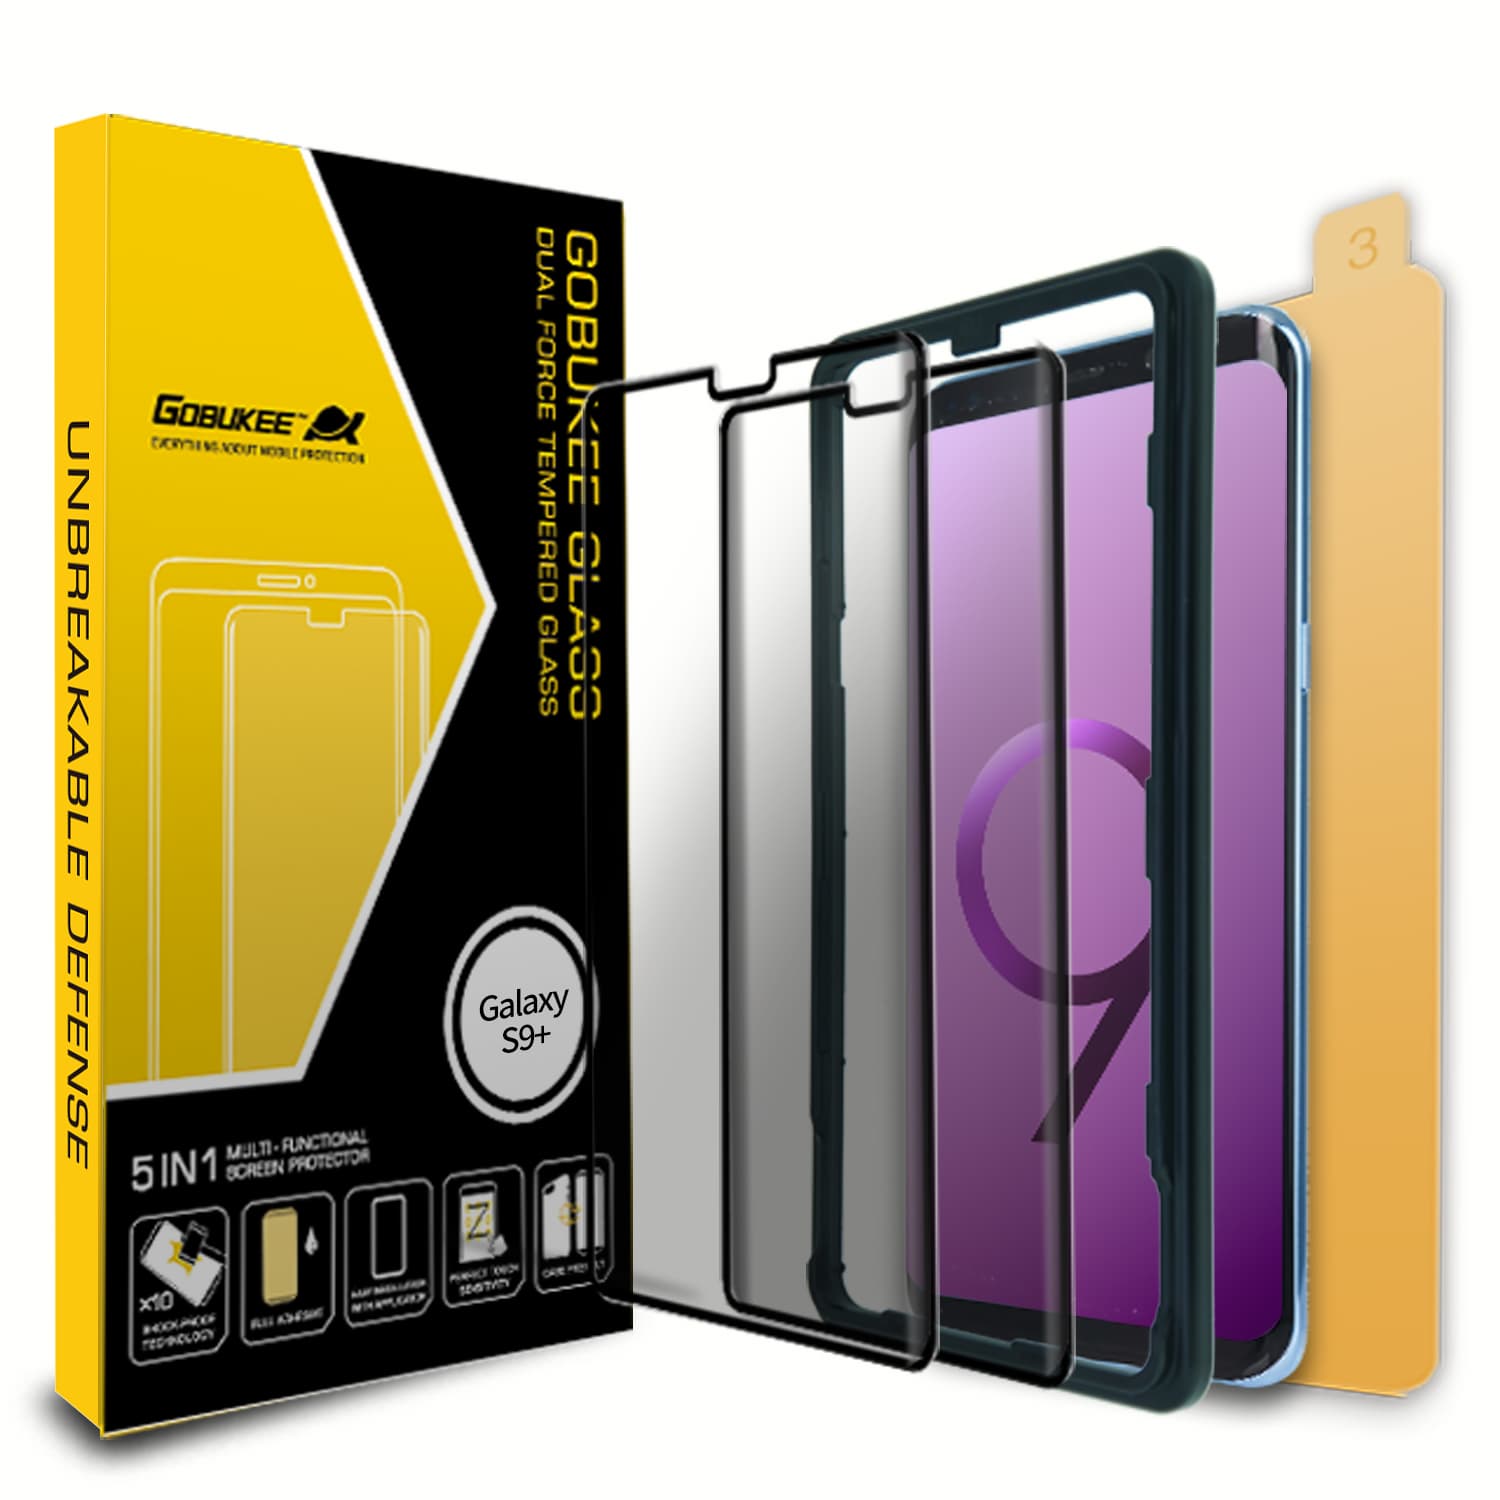 GOBUKEE ULTRAEDGE For Galaxy S series double tempered glass